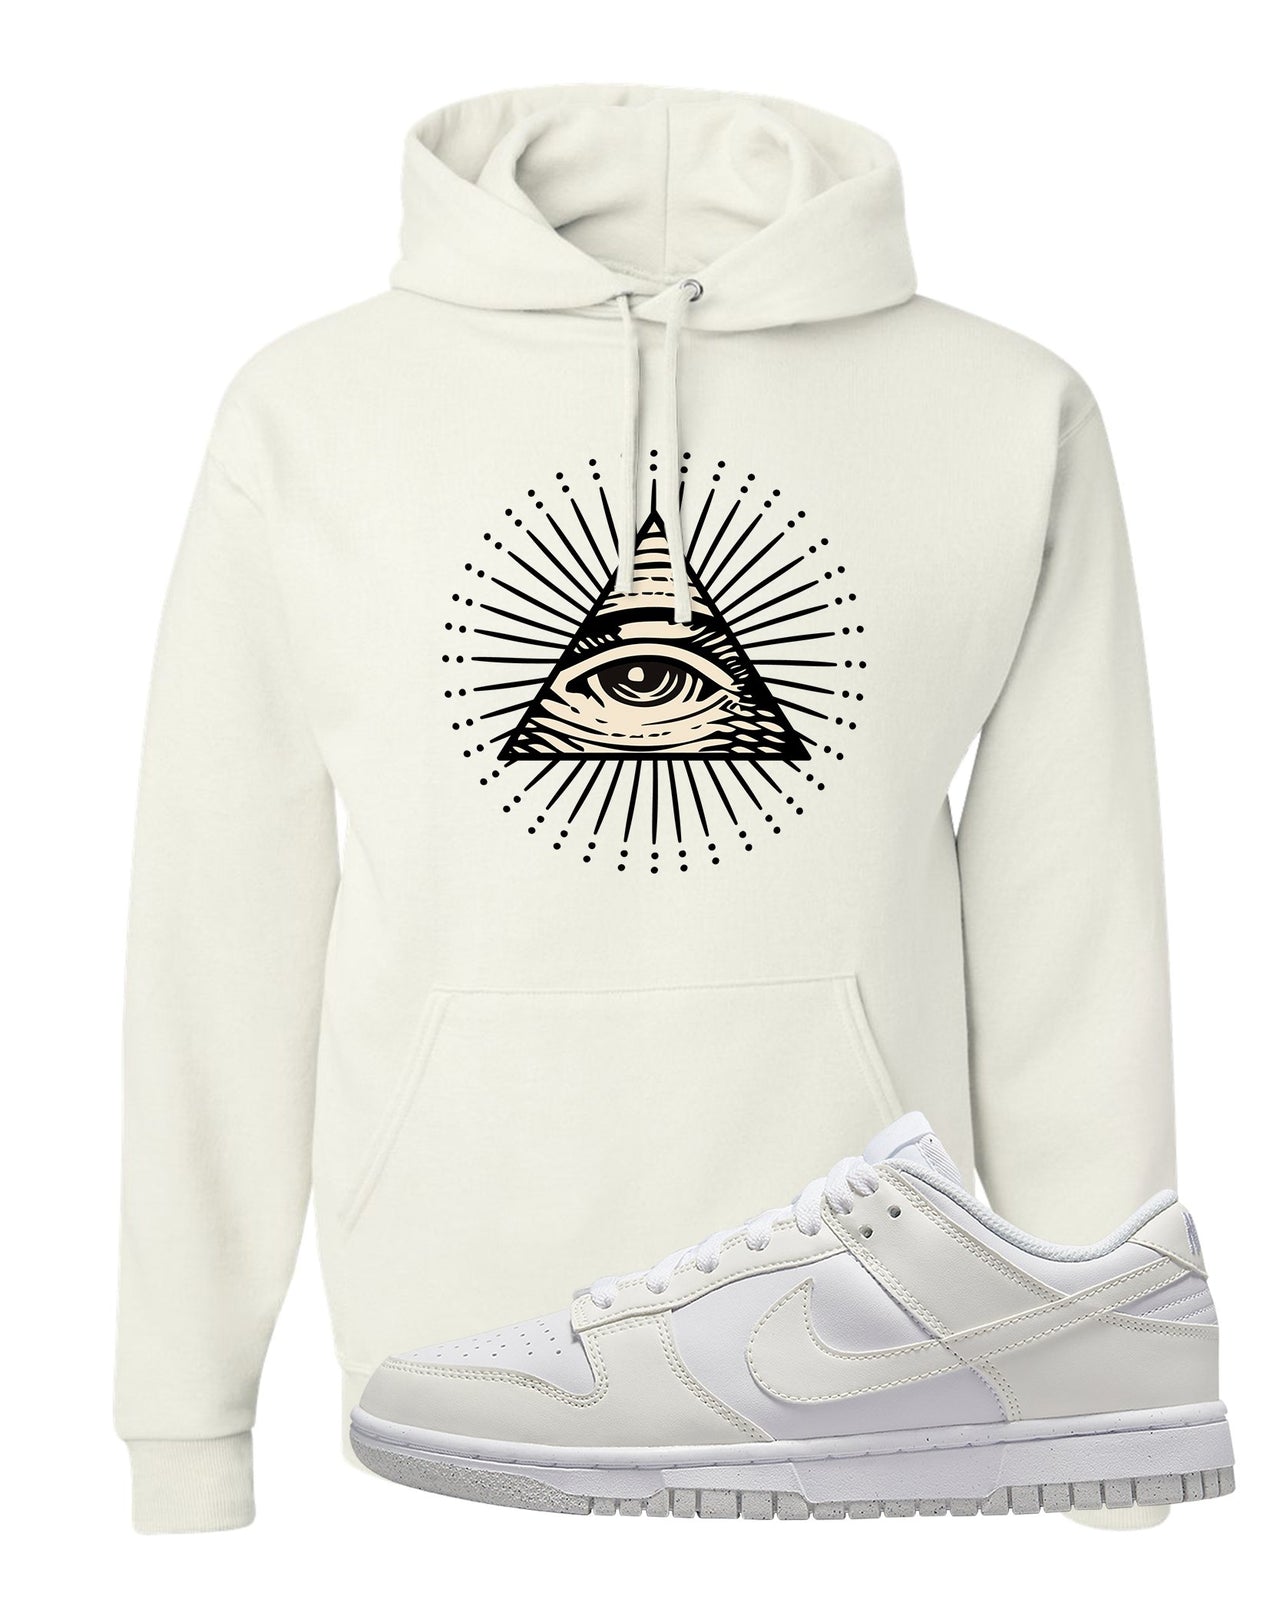 Next Nature White Low Dunks Hoodie | All Seeing Eye, White